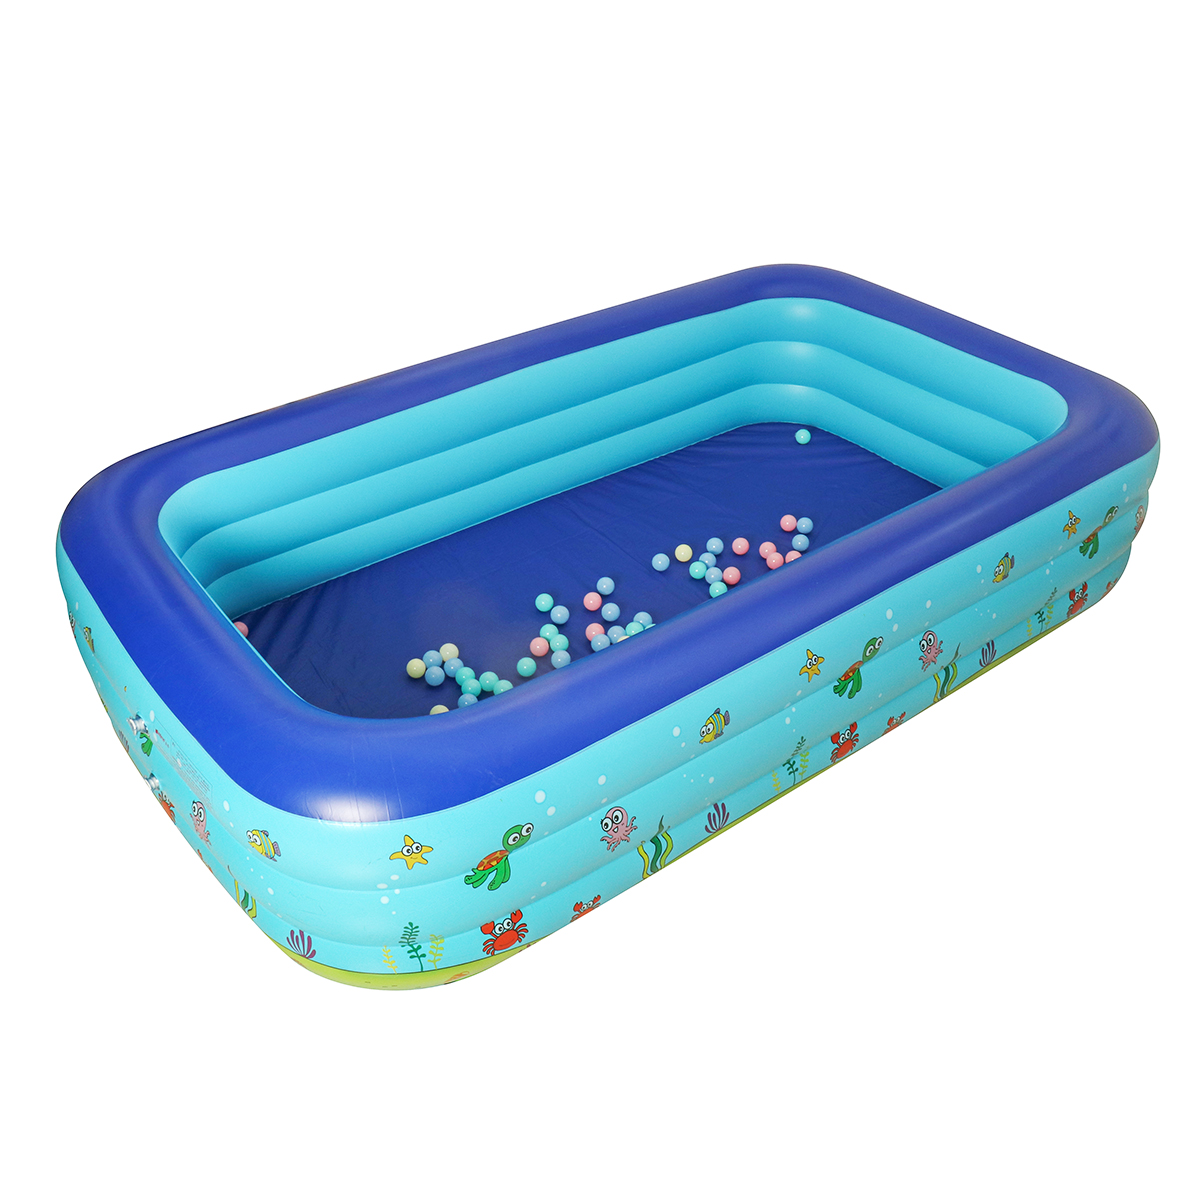 120x72x24inch-Family-Inflatable-Swimming-Pool-Outdoor-Garden-Ground-Swimming-Pool-with-Filter-Pump-1697937-3